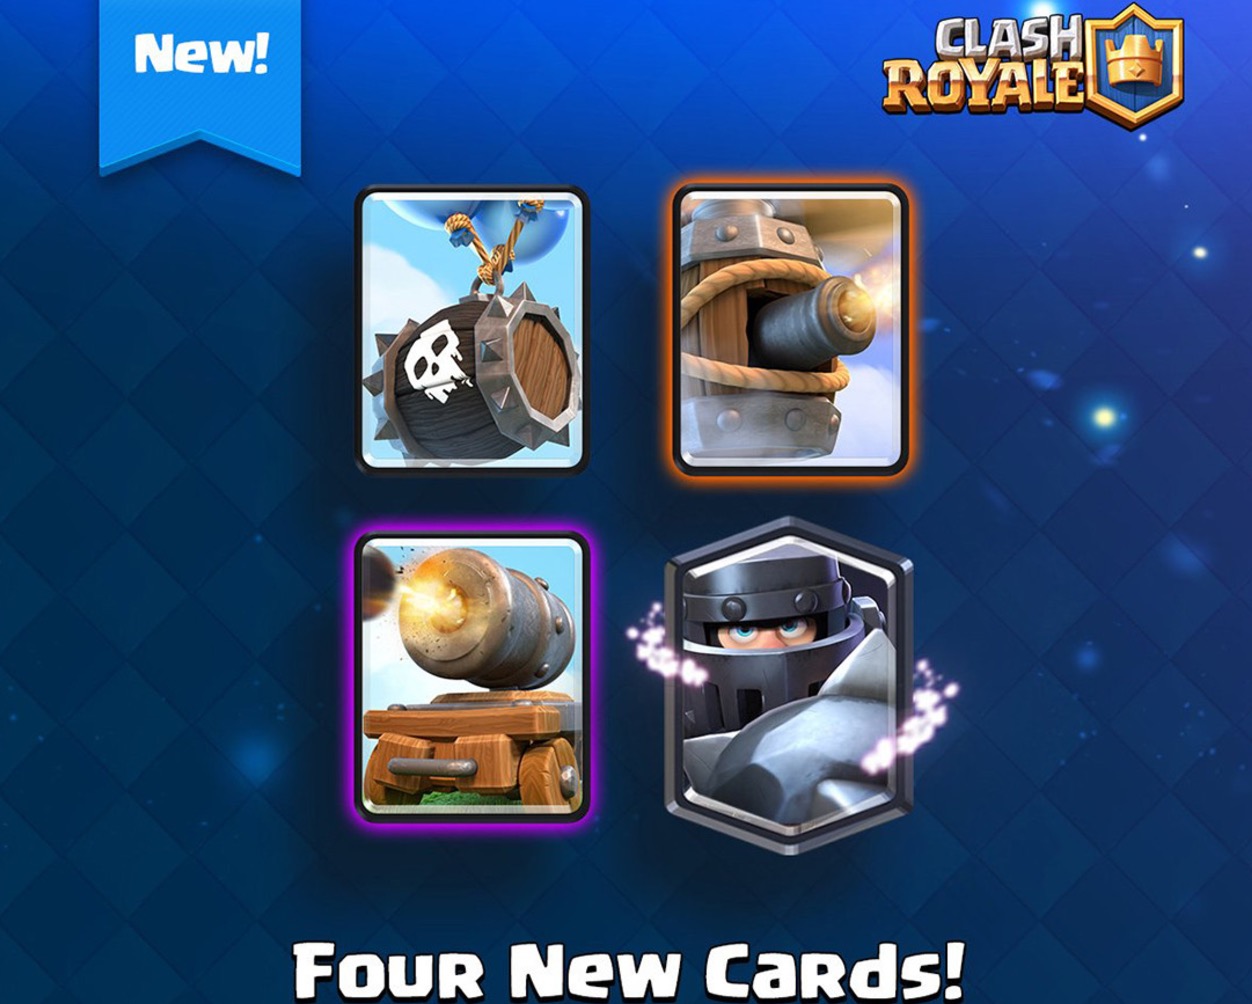 Clash Royale August Update 2v2 and Mega Knight Emerge